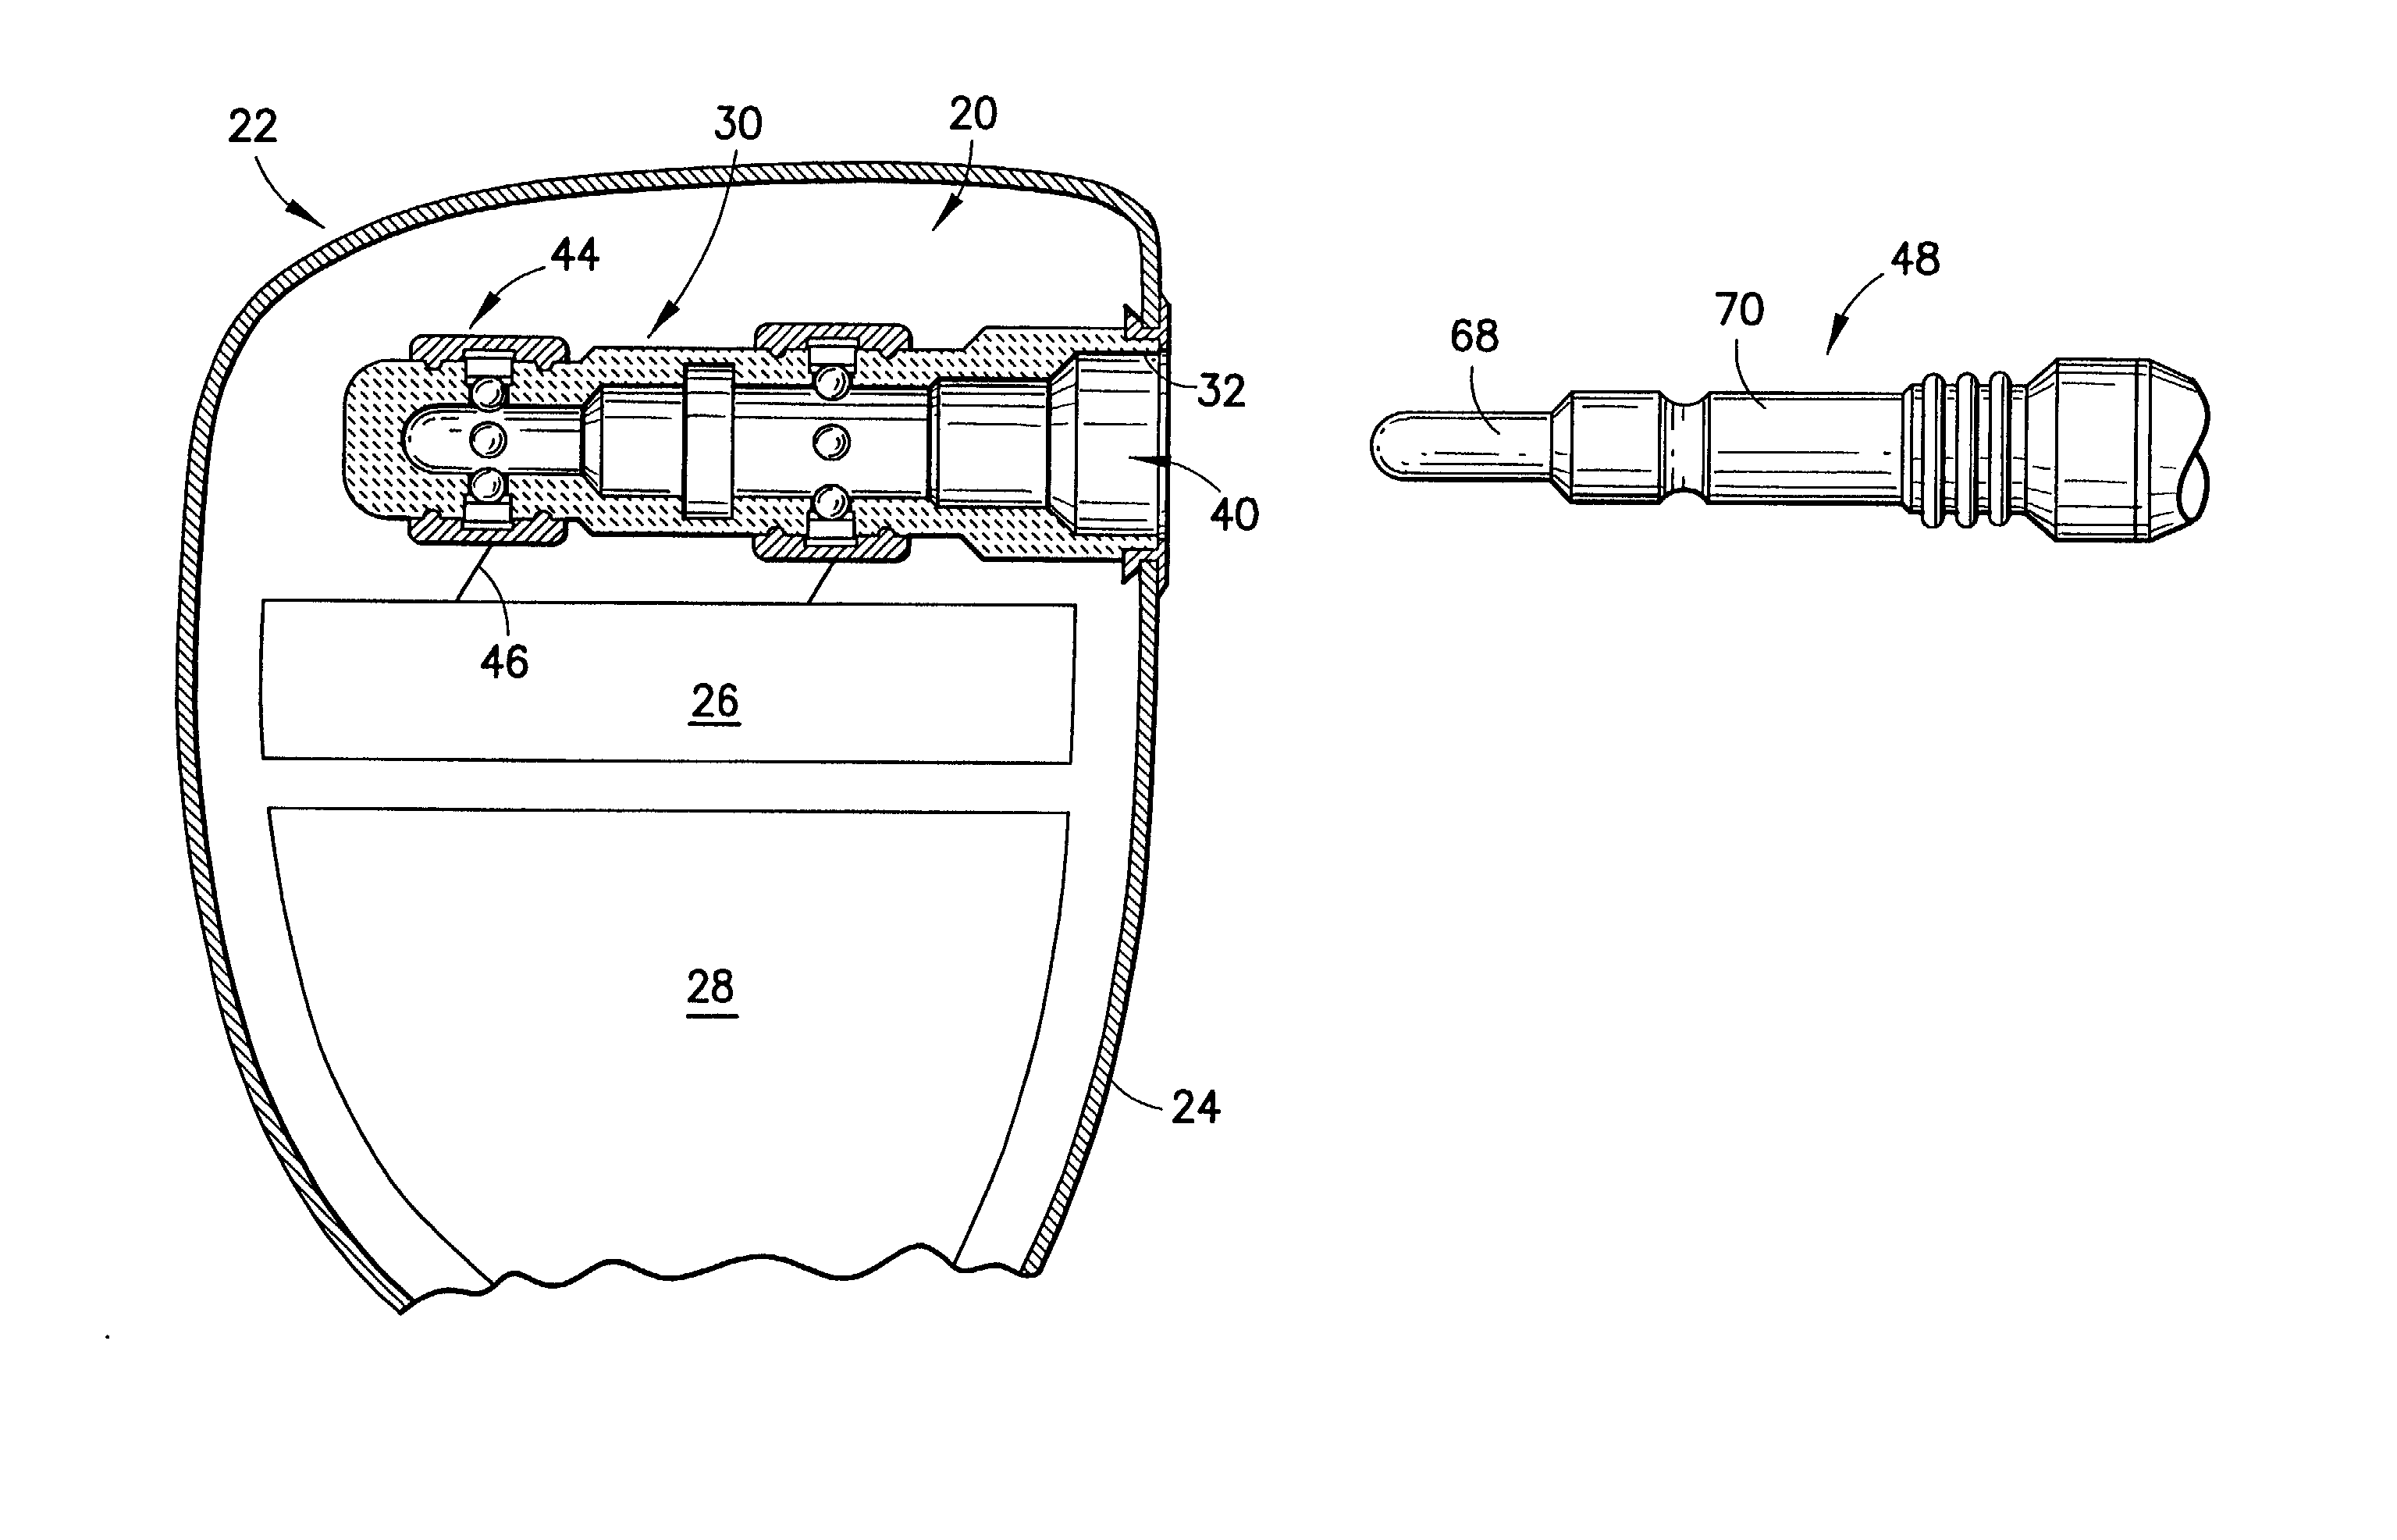 Hermetically sealed feedthrough connector using shape memory alloy for implantable medical device